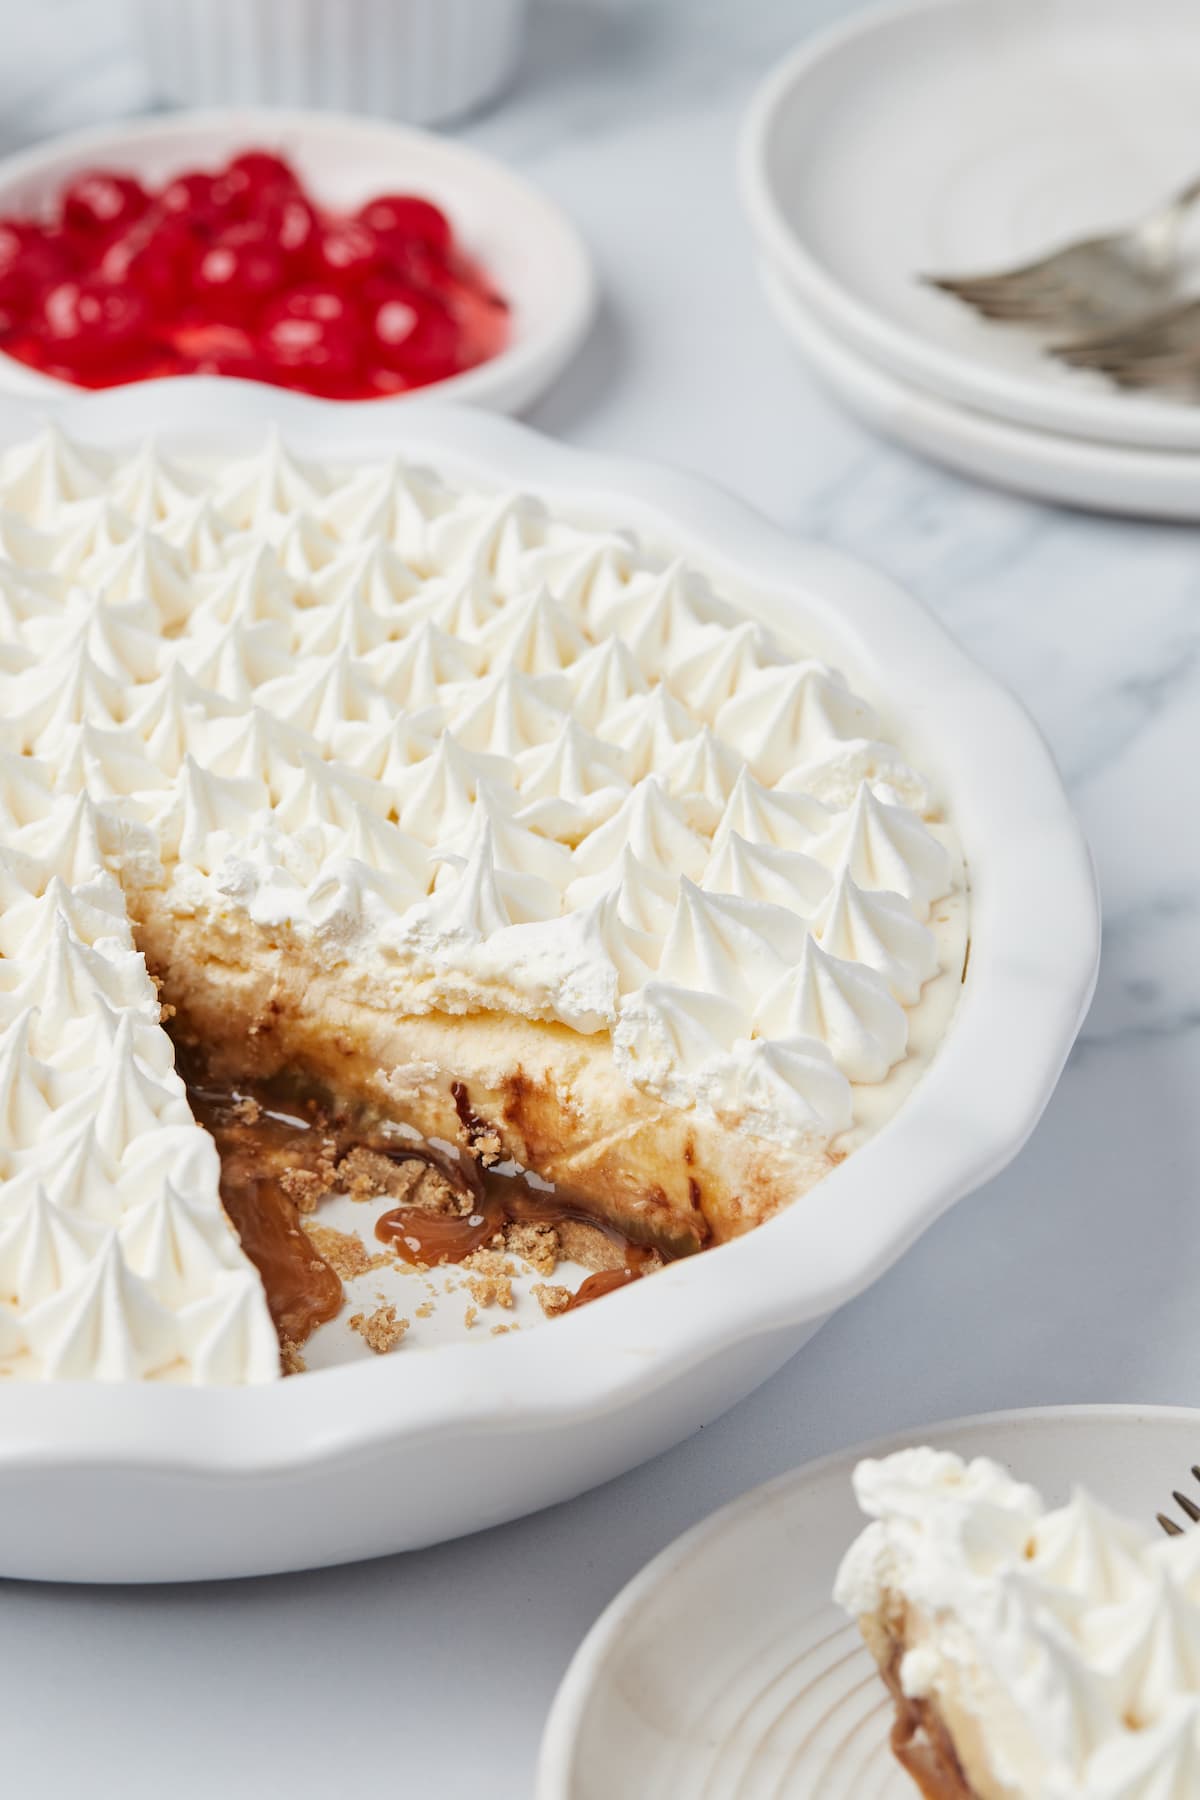 A no-bake pie topped with whipped cream rosettes. A slice has been cut out of the pie.